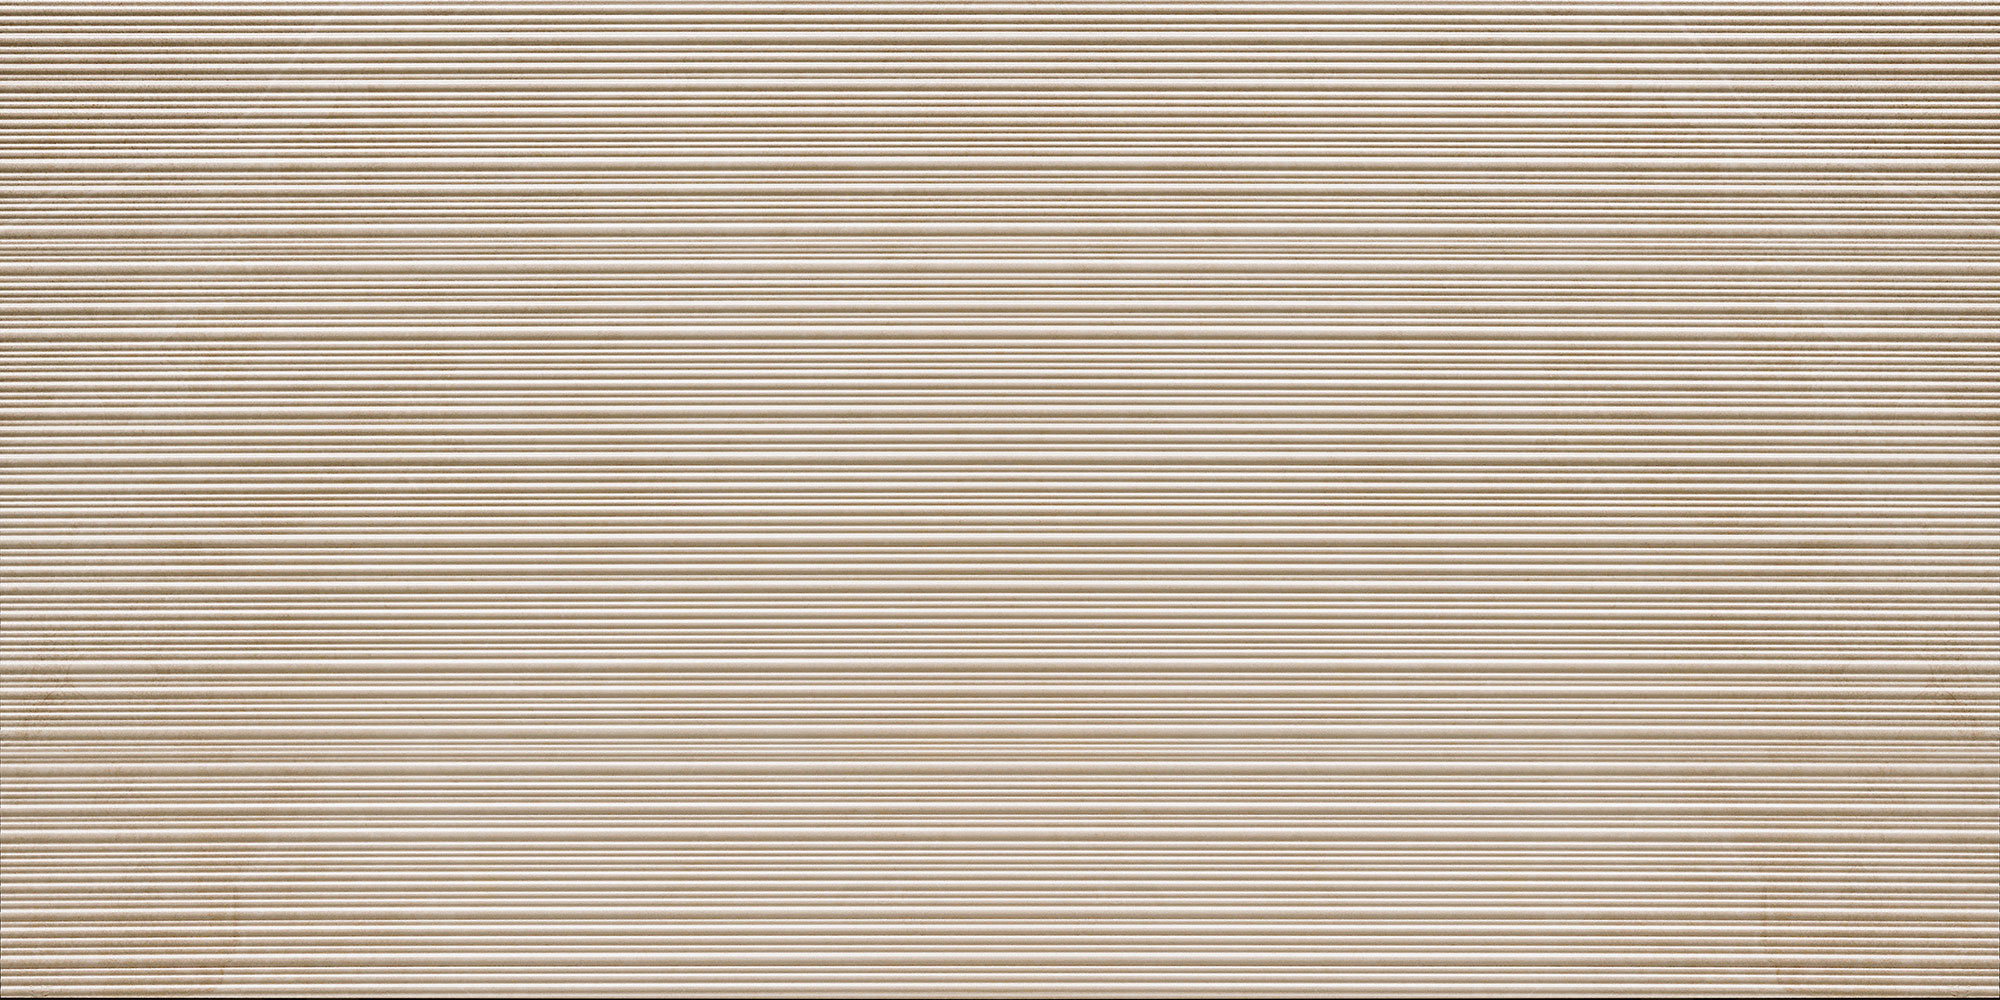 Italgraniti Shale Taupe Ribbed SL06BAR 60x120cm rectified 9mm